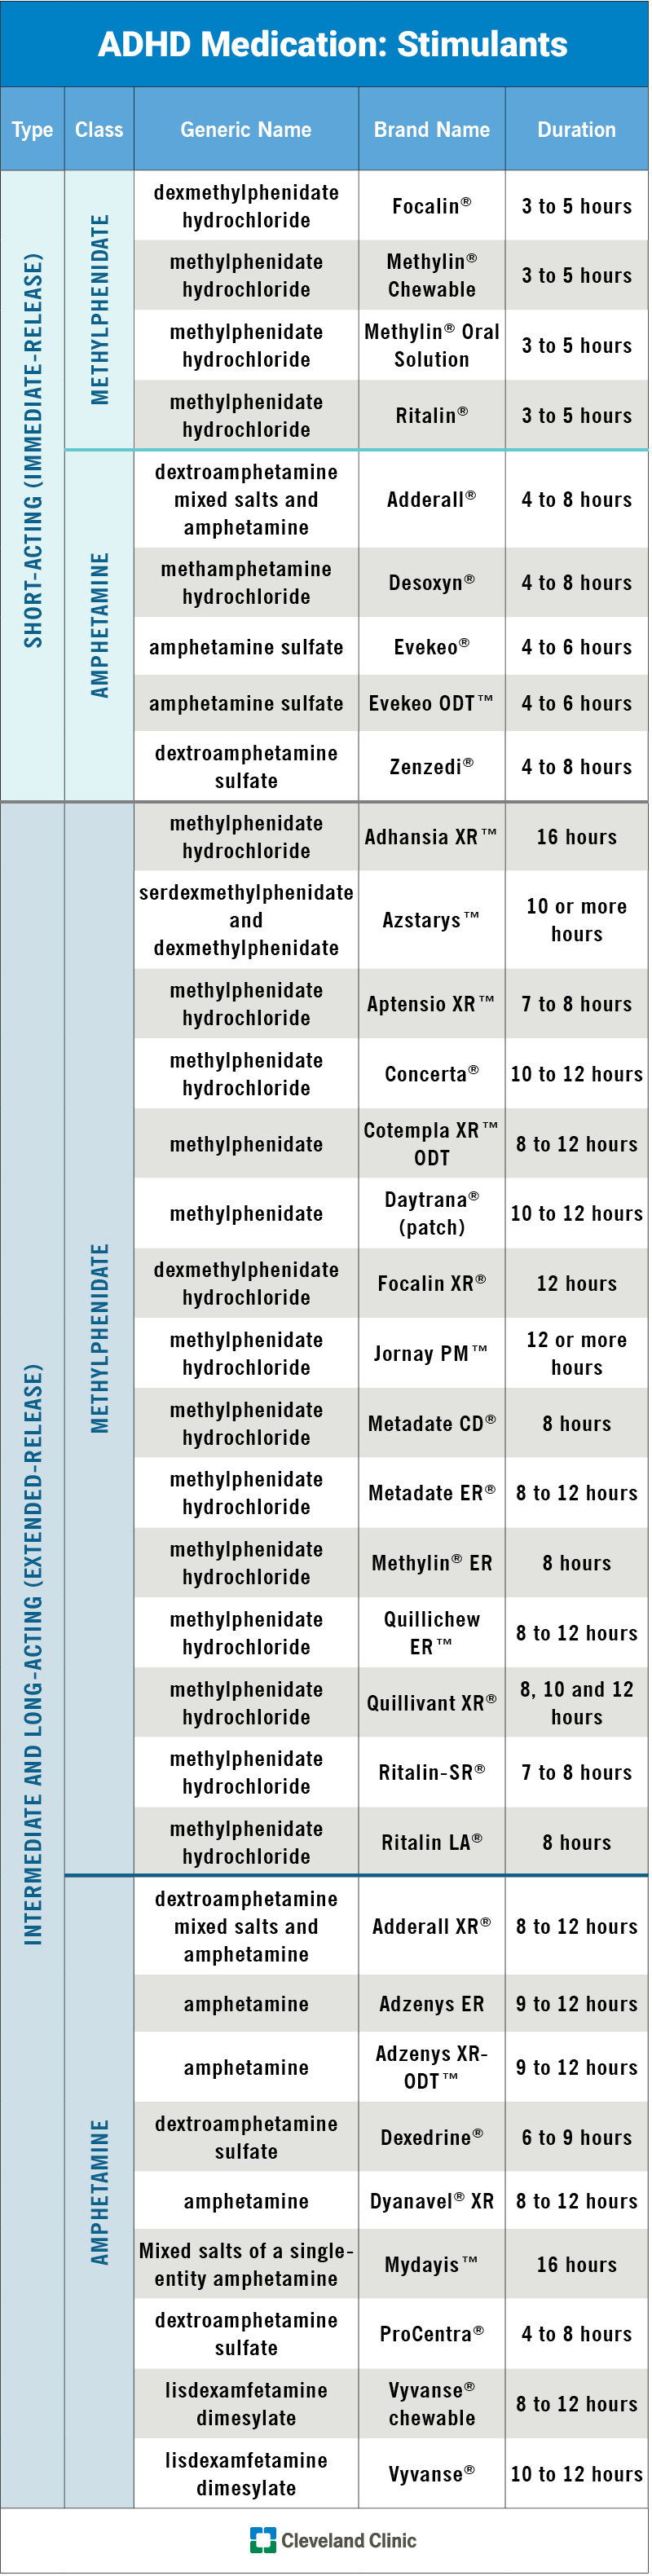 Chart displays the type, class, generic name, brand name and duration of each stimulant ADHD medication.